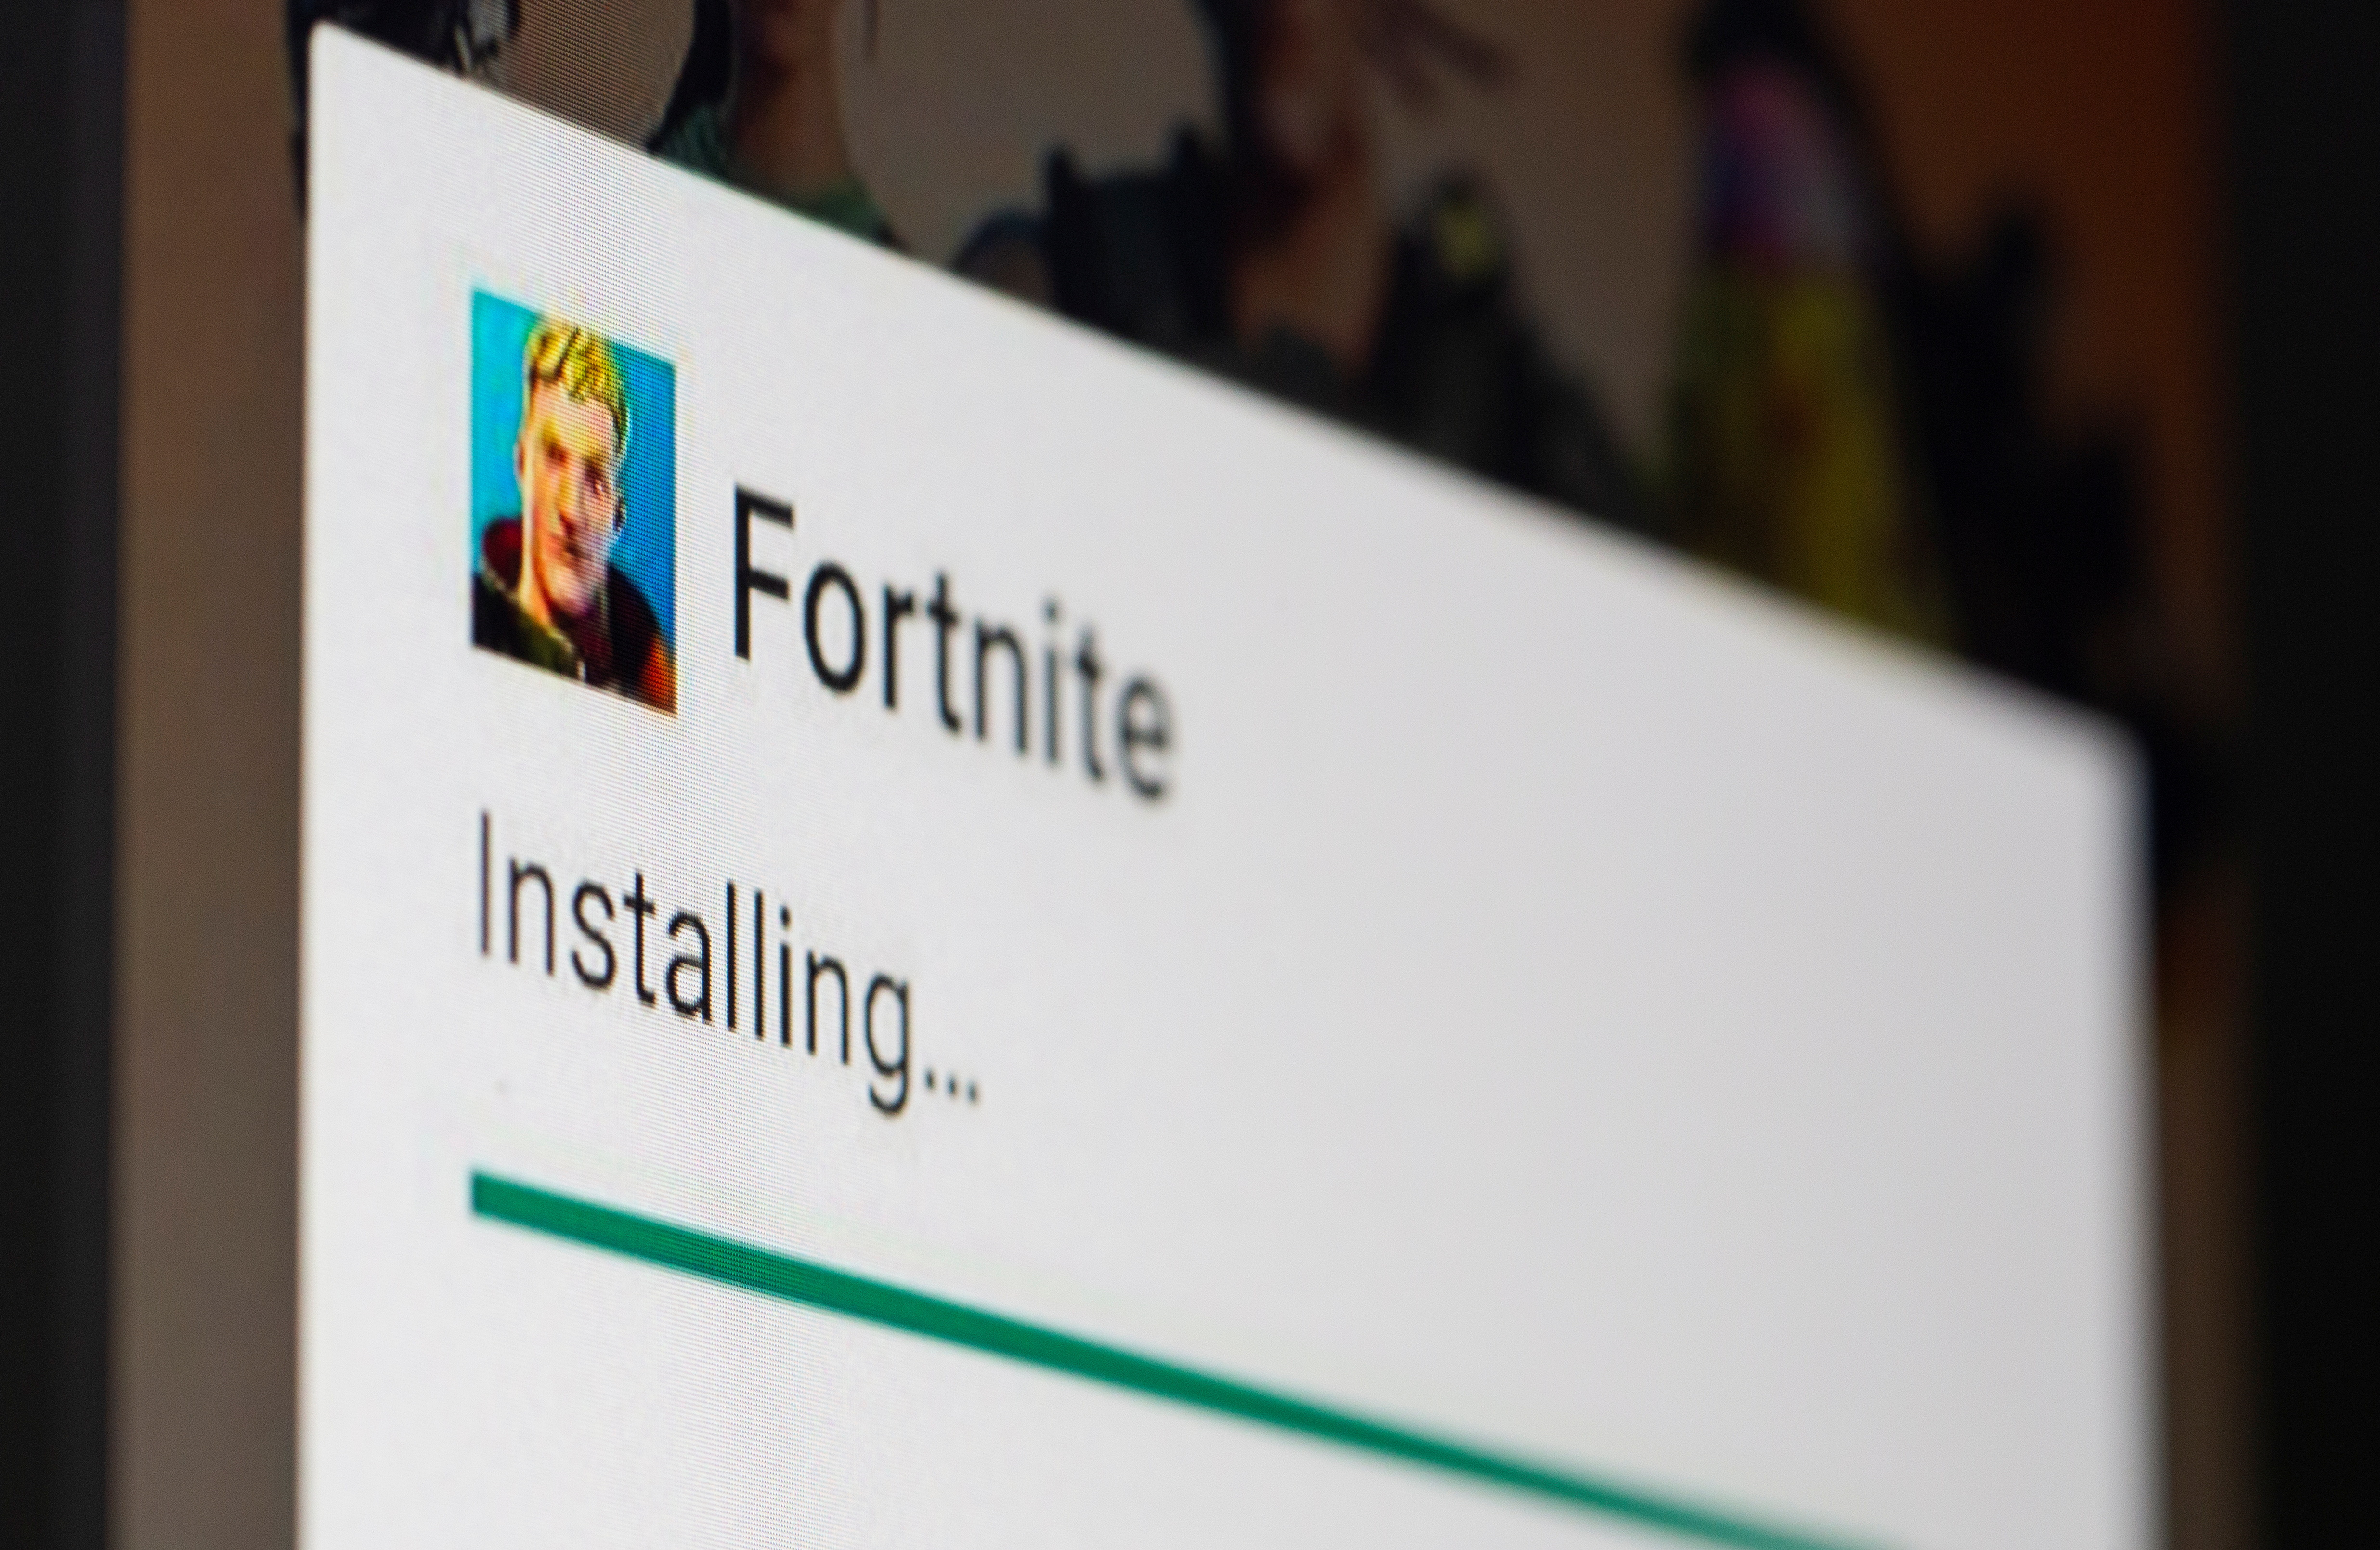 Fortnite installing on Android is seen in illustration